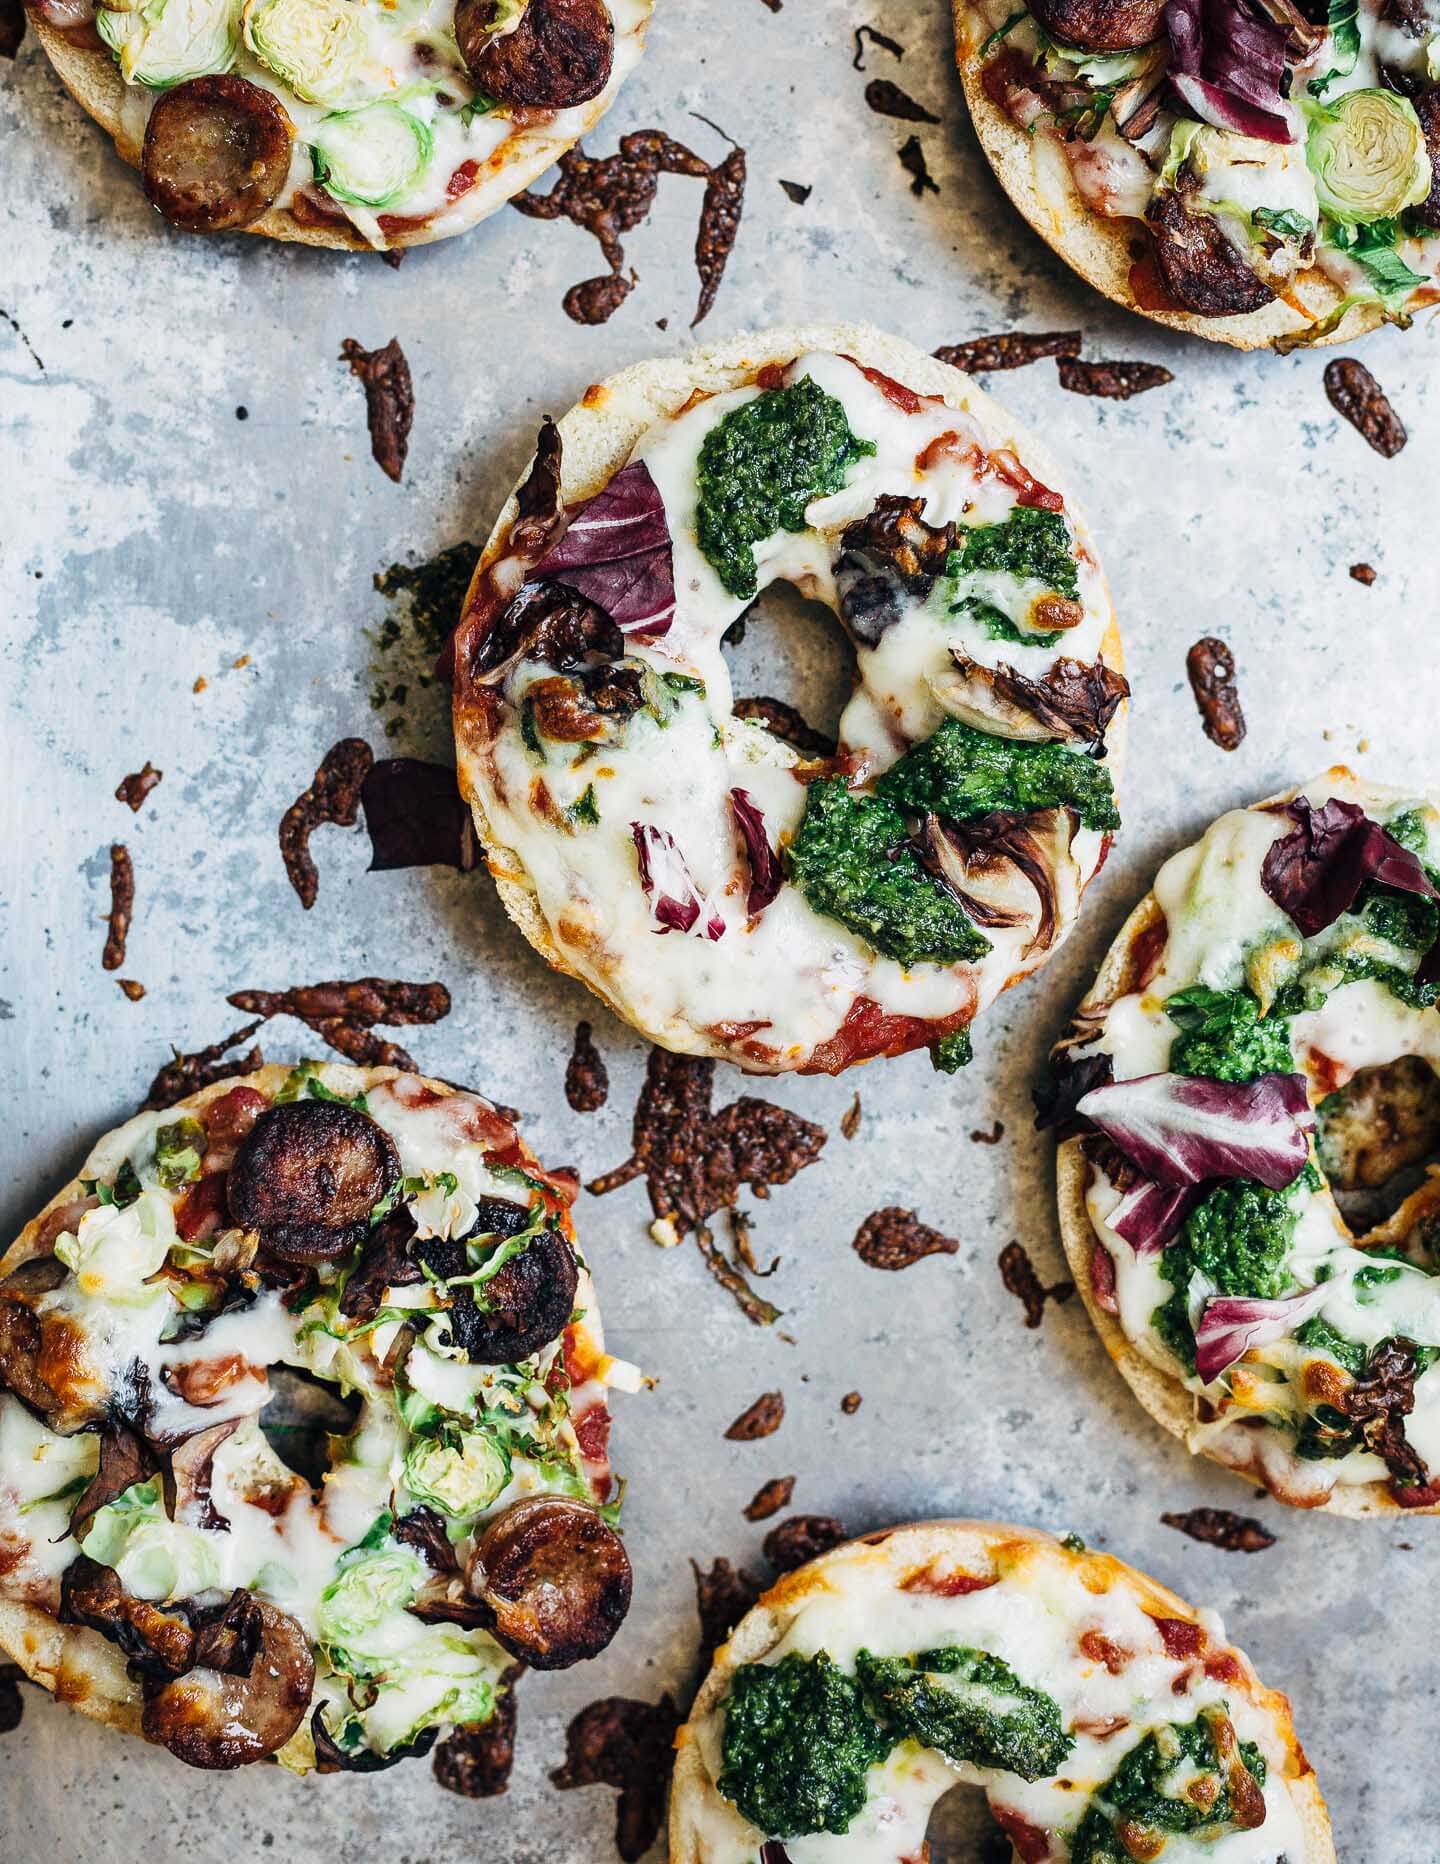 How to make pizza bagels at home! Customize your pizza bagels with pesto, sausage, greens, or whatever vegetables and toppings you have on hand.